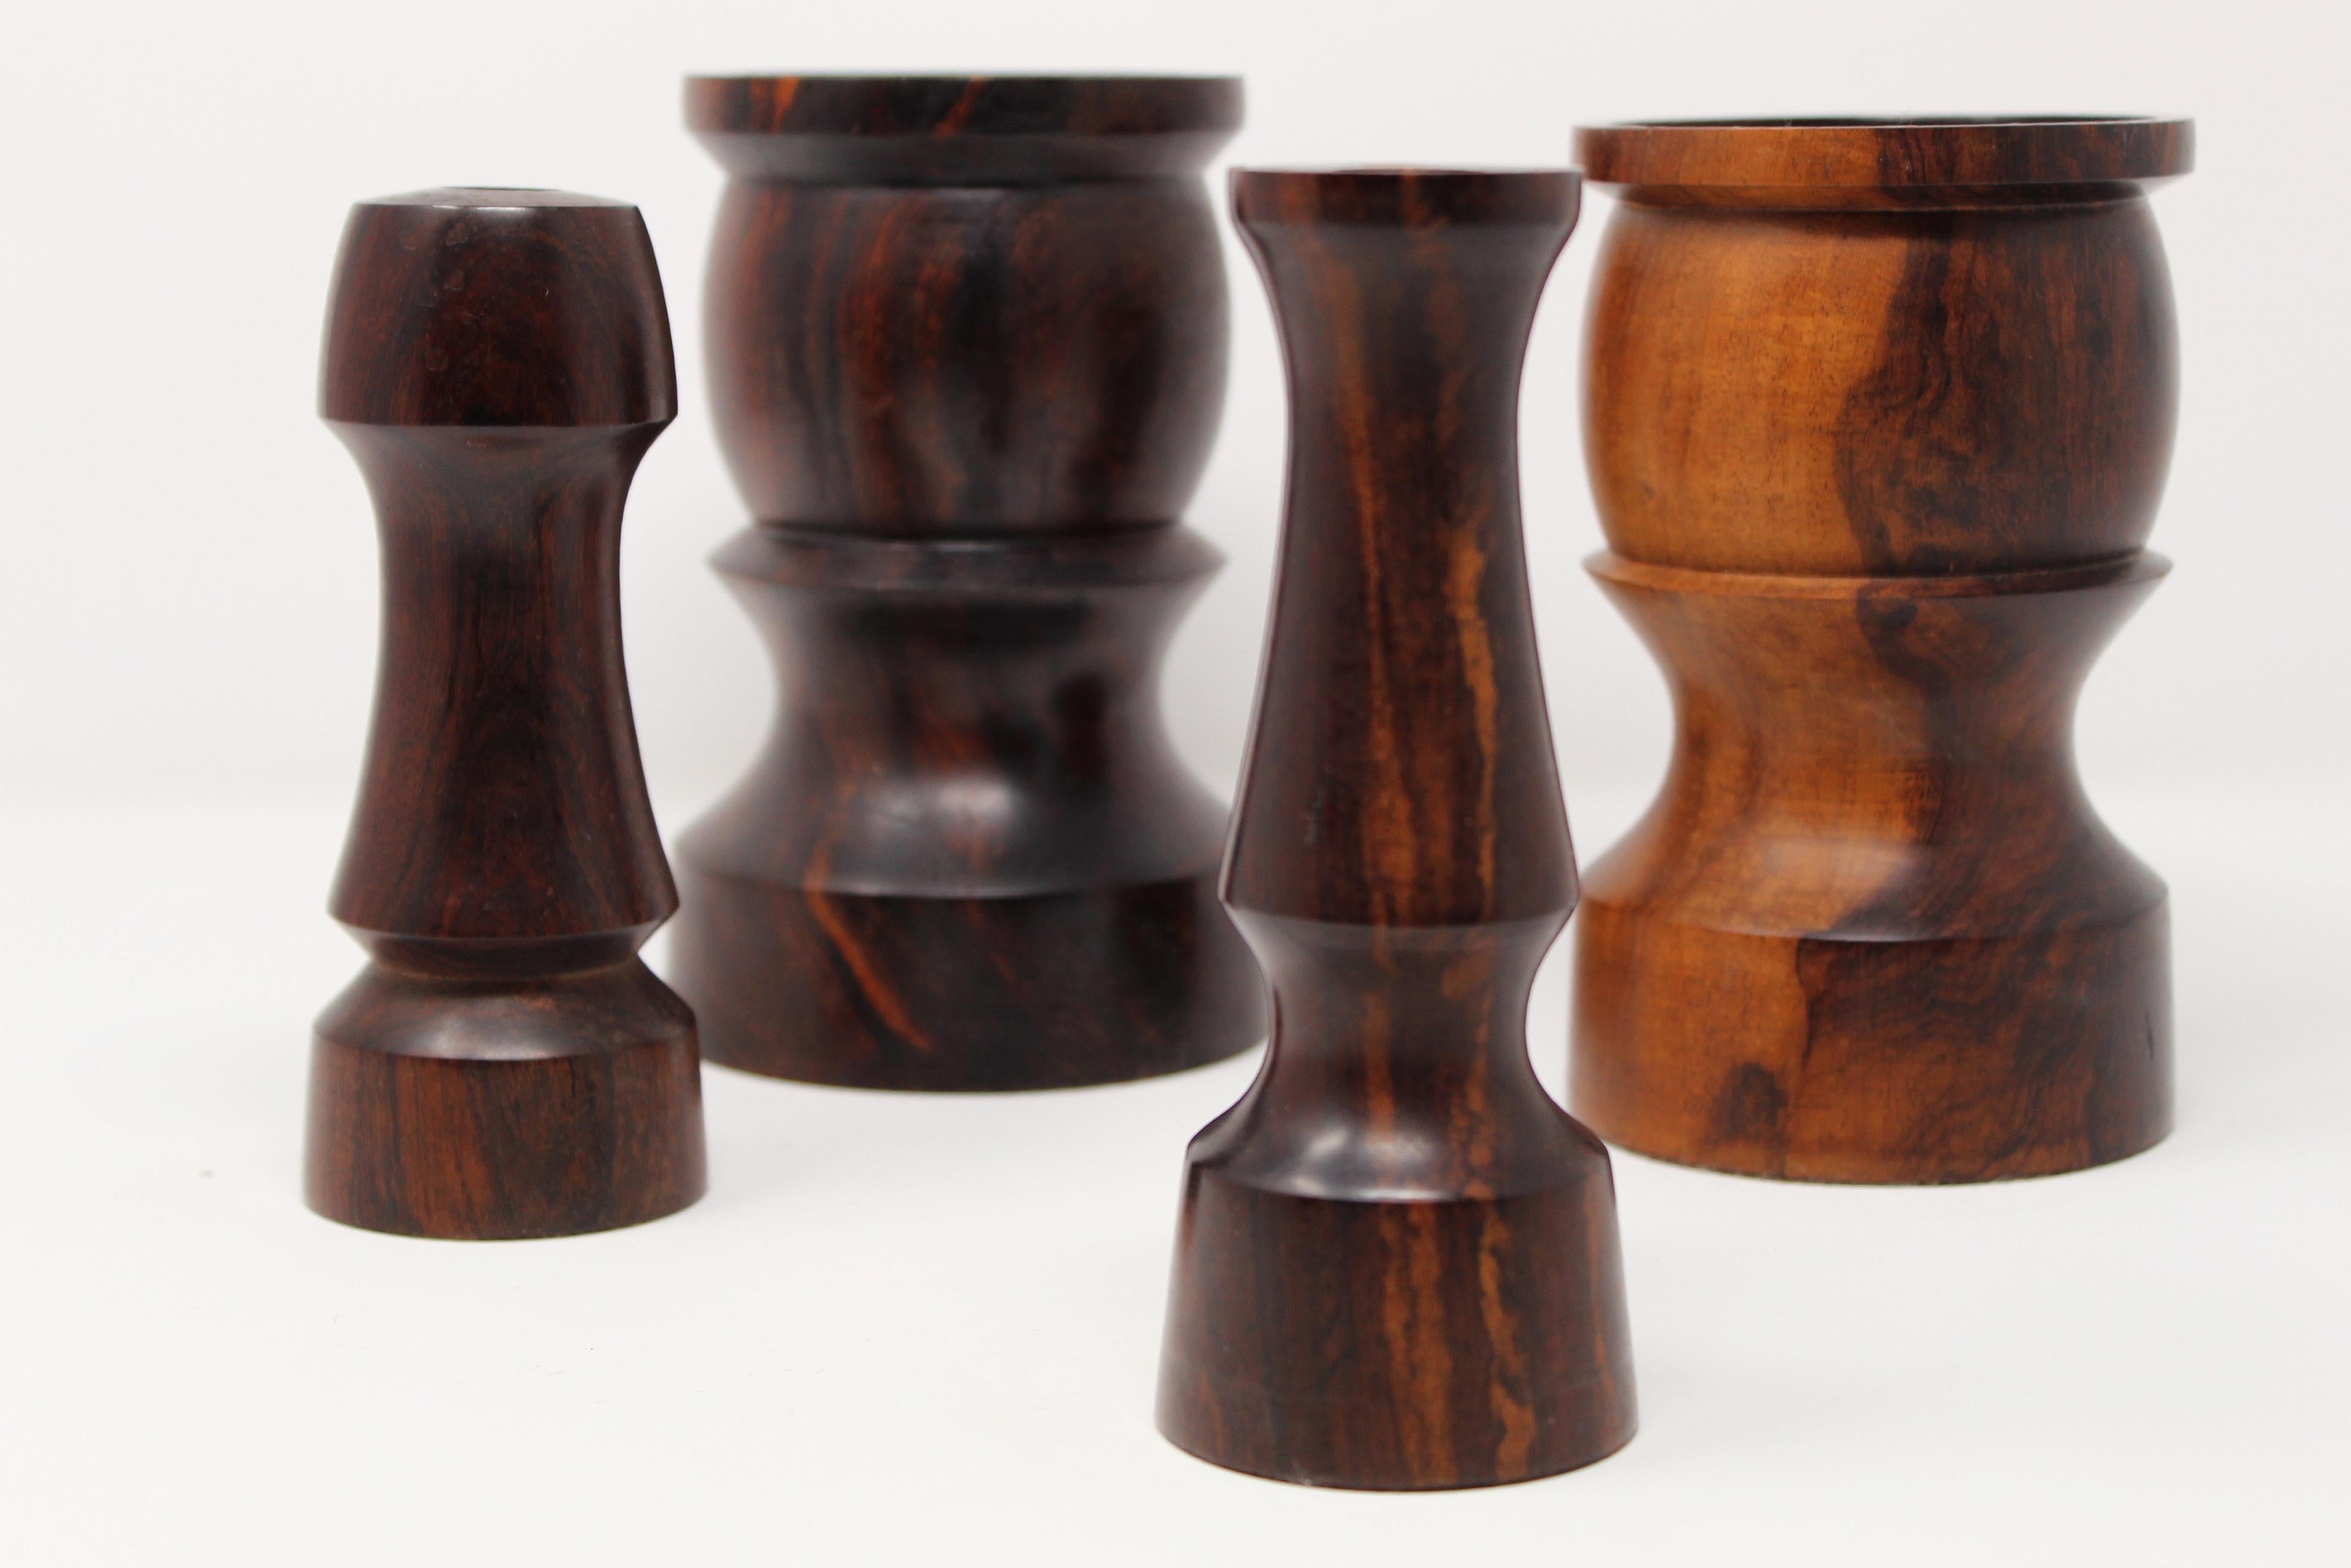 Set or group of 4 finely turned candlesticks by same artist, made of solid rosewood with consistent modernist shapes. We have added several images and different angles with the intent of showcasing beautiful wood grain. Good vintage condition as